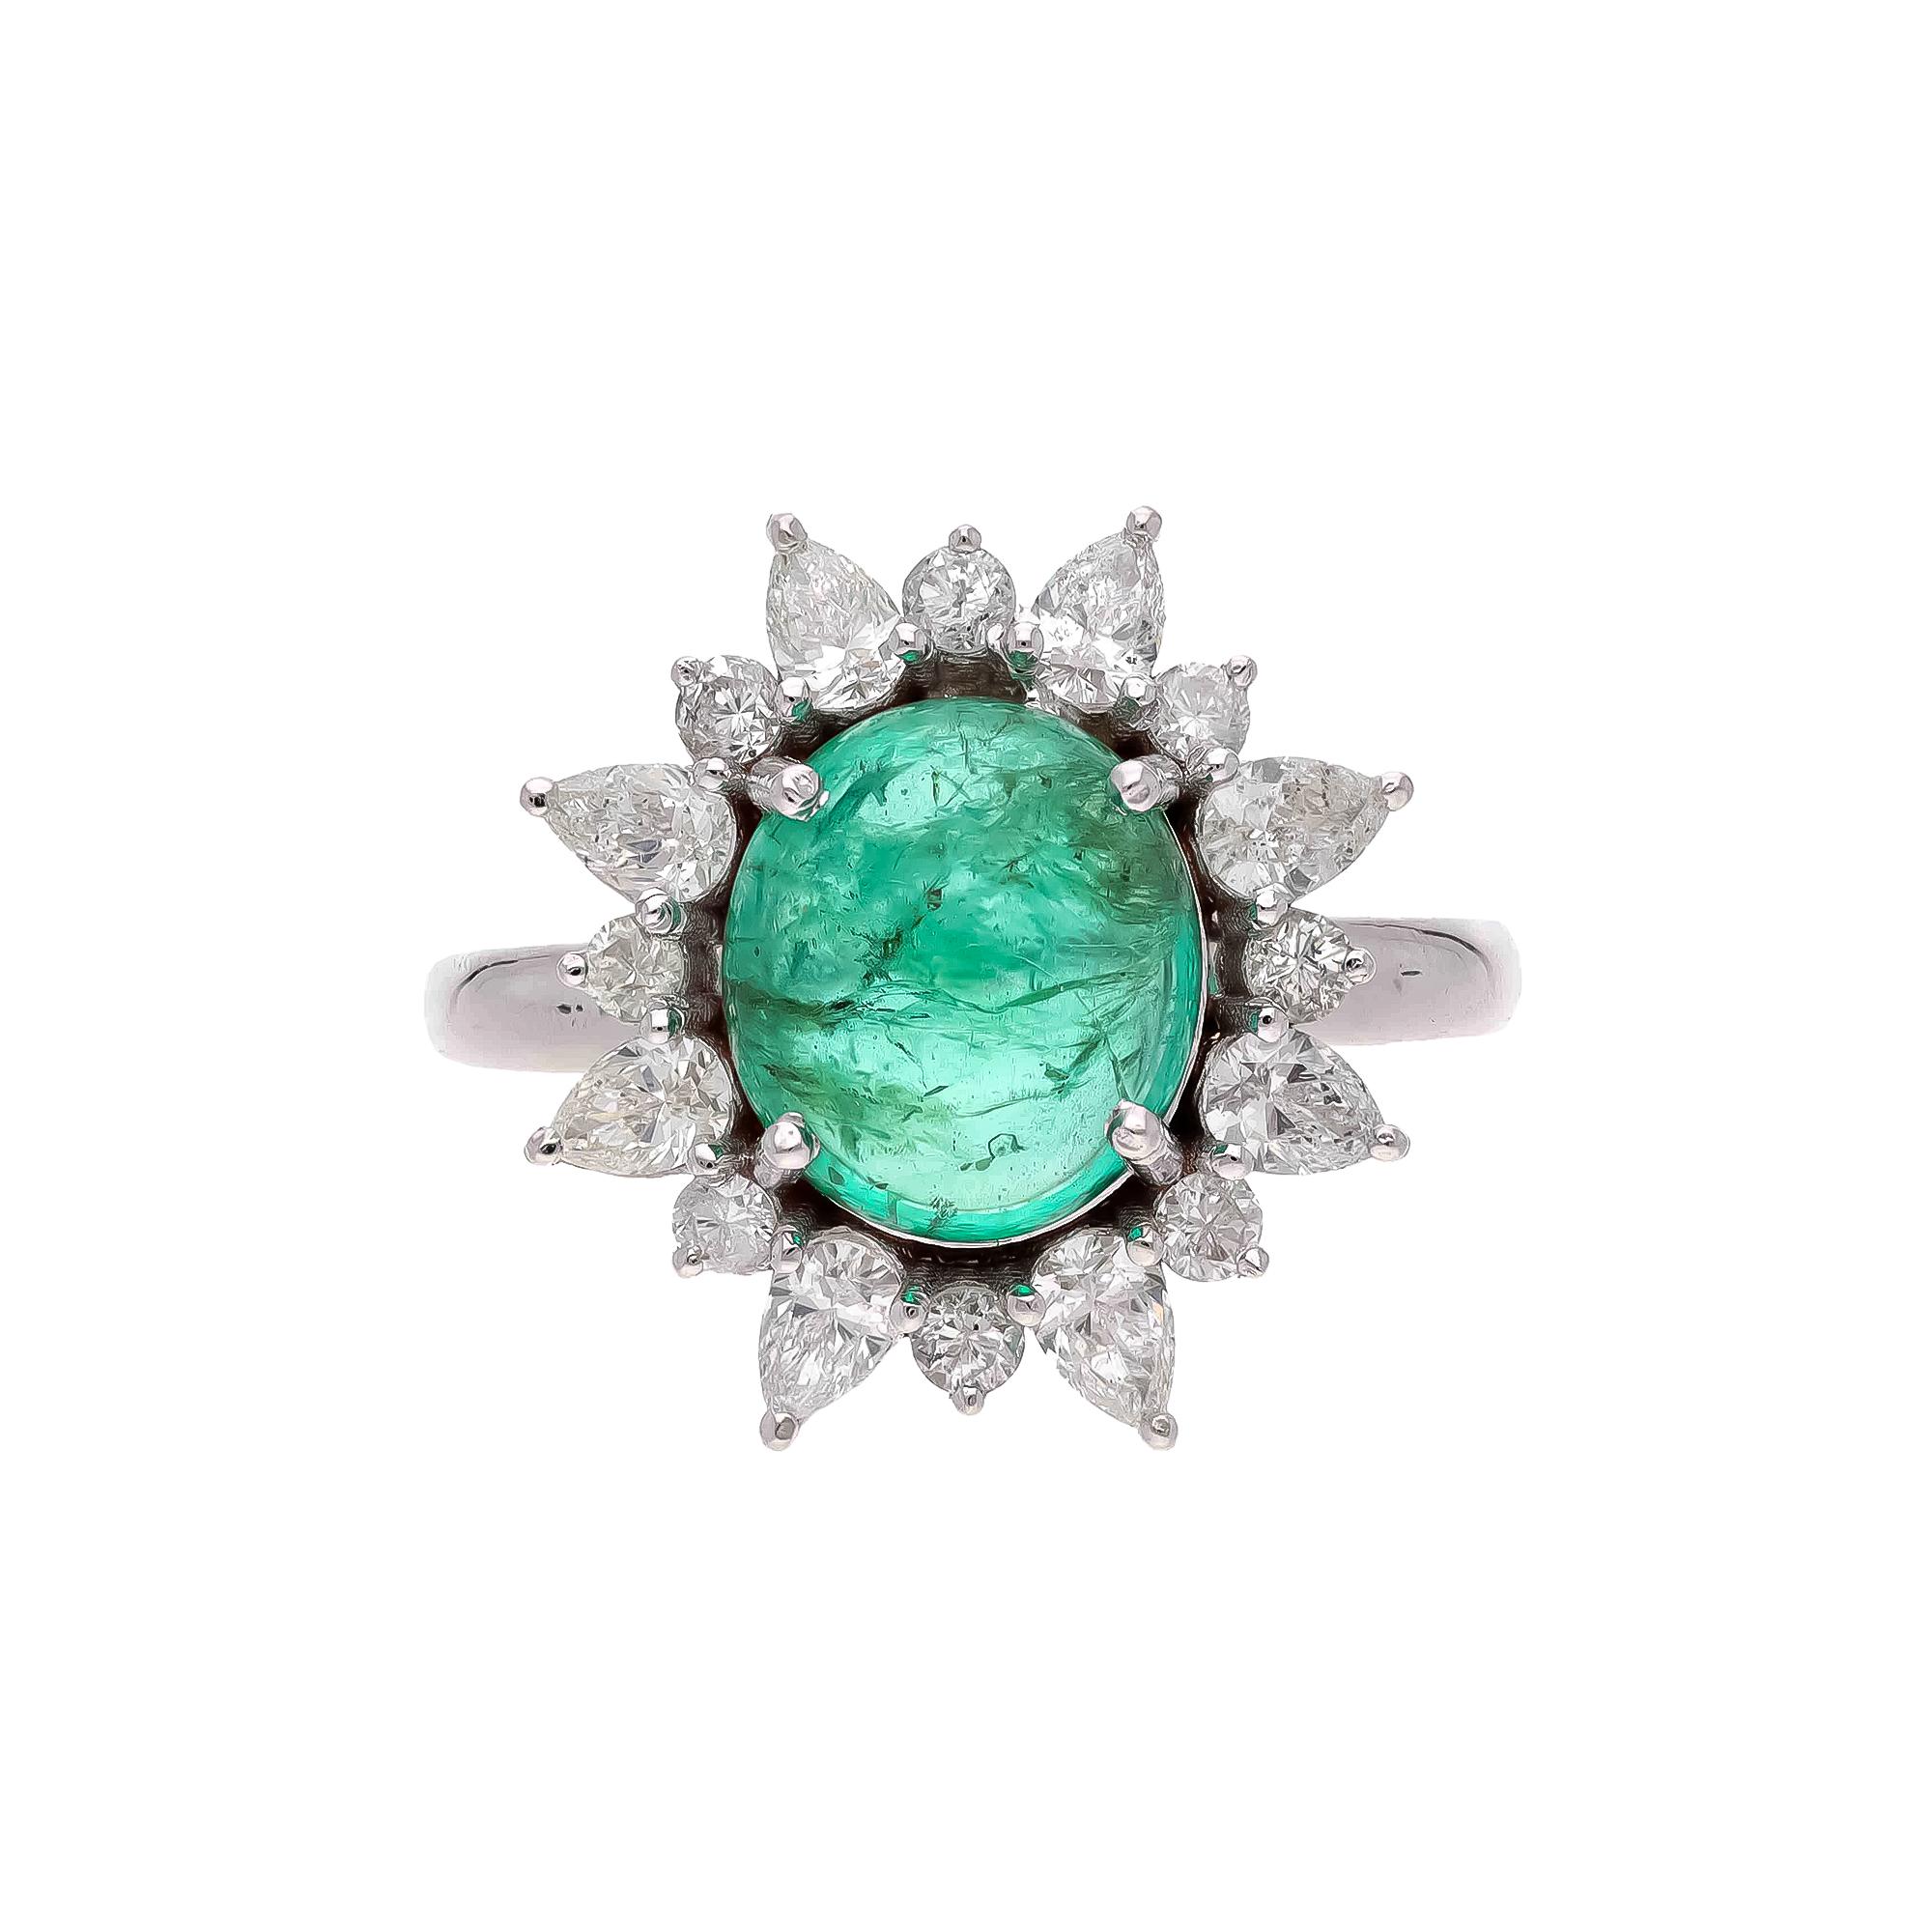 This is a wonderful natural Zambian Emerald ring. it has very high quality emeralds and very good quality diamonds ( vsi ) clarity and G Colour .

Emerald: 3.28 carats
diamonds : 1.02 carats
gold : 5.04 gms



Its very hard to capture the true color